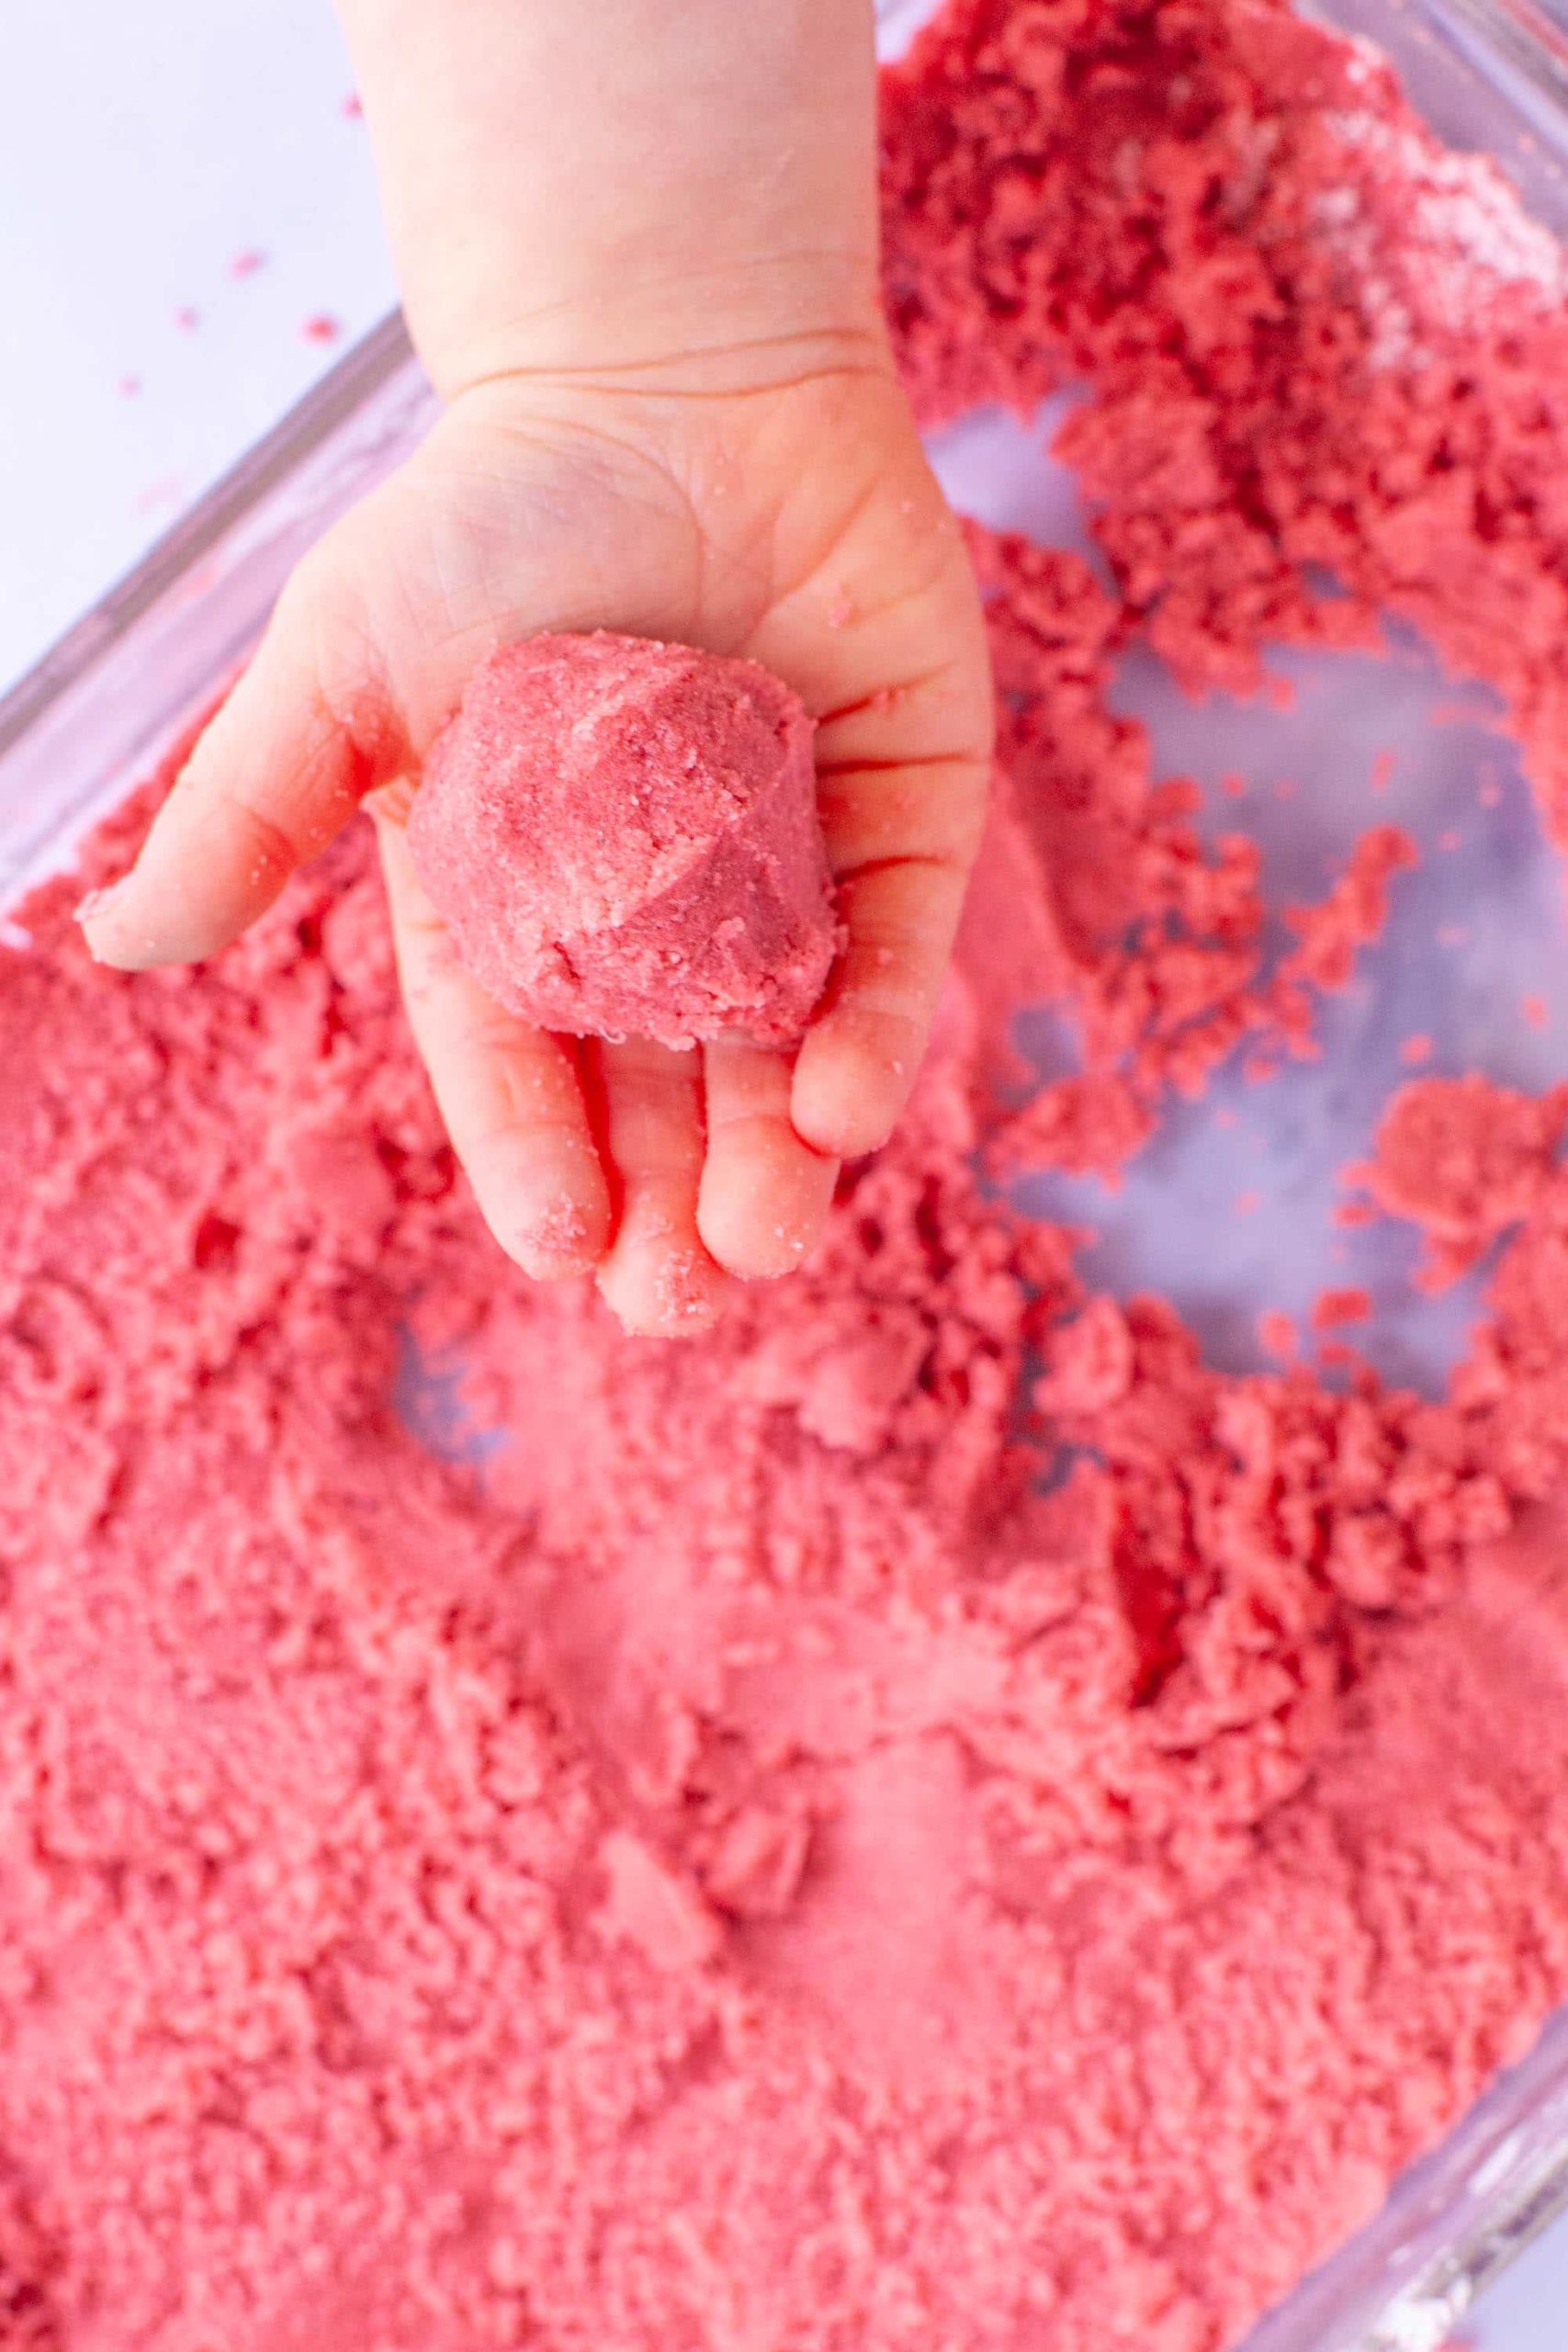 Try this storage hack for all your play doughs, clays, kinetic sands a, Kinetic Sand